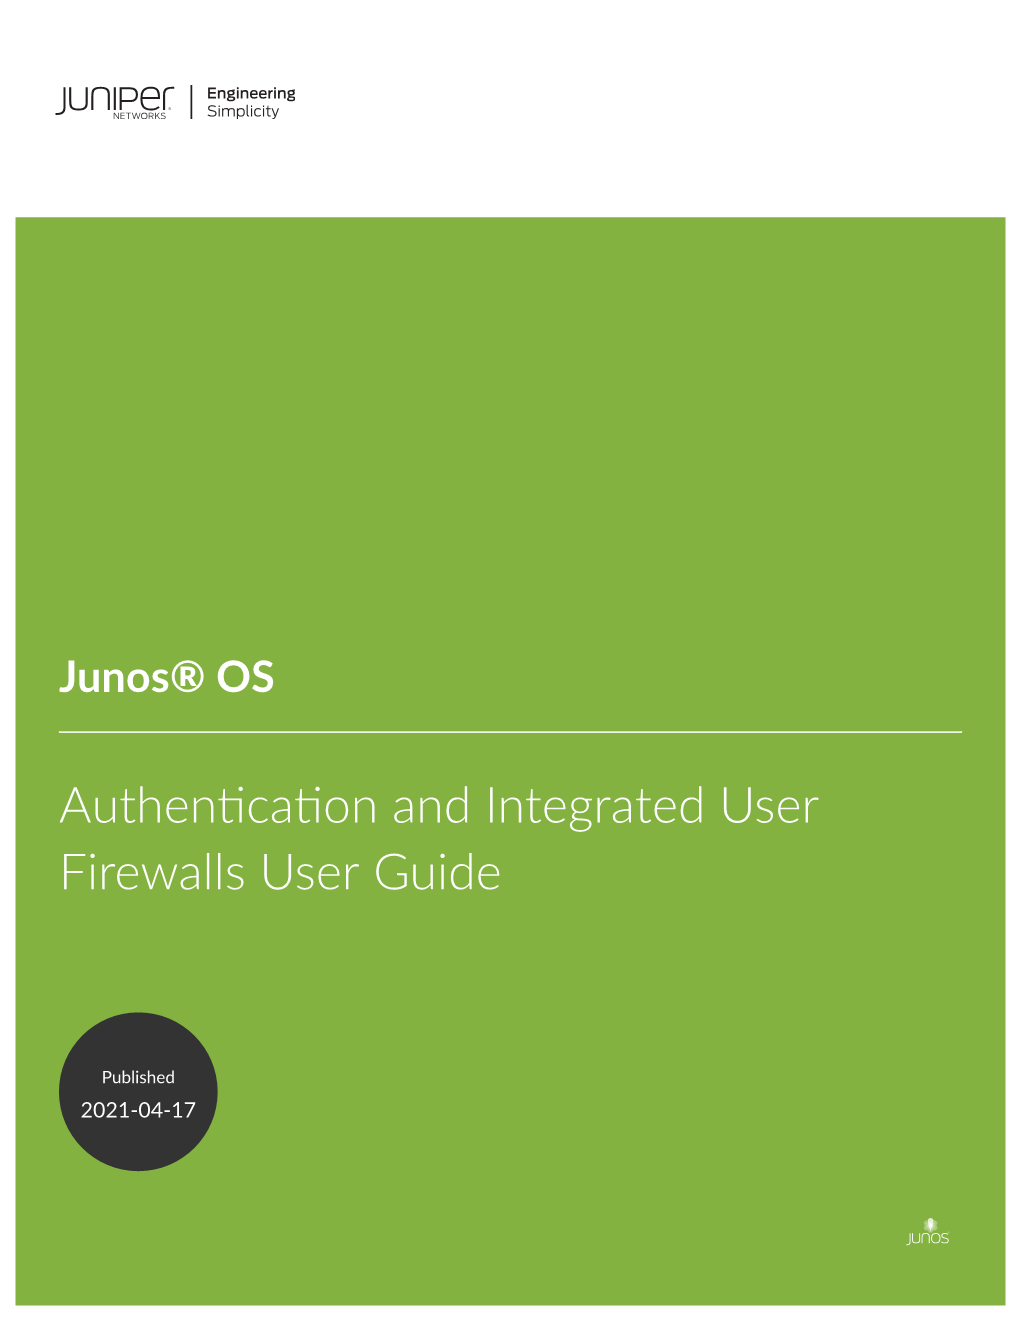 Junos® OS Authentication and Integrated User Firewalls User Guide Copyright © 2021 Juniper Networks, Inc